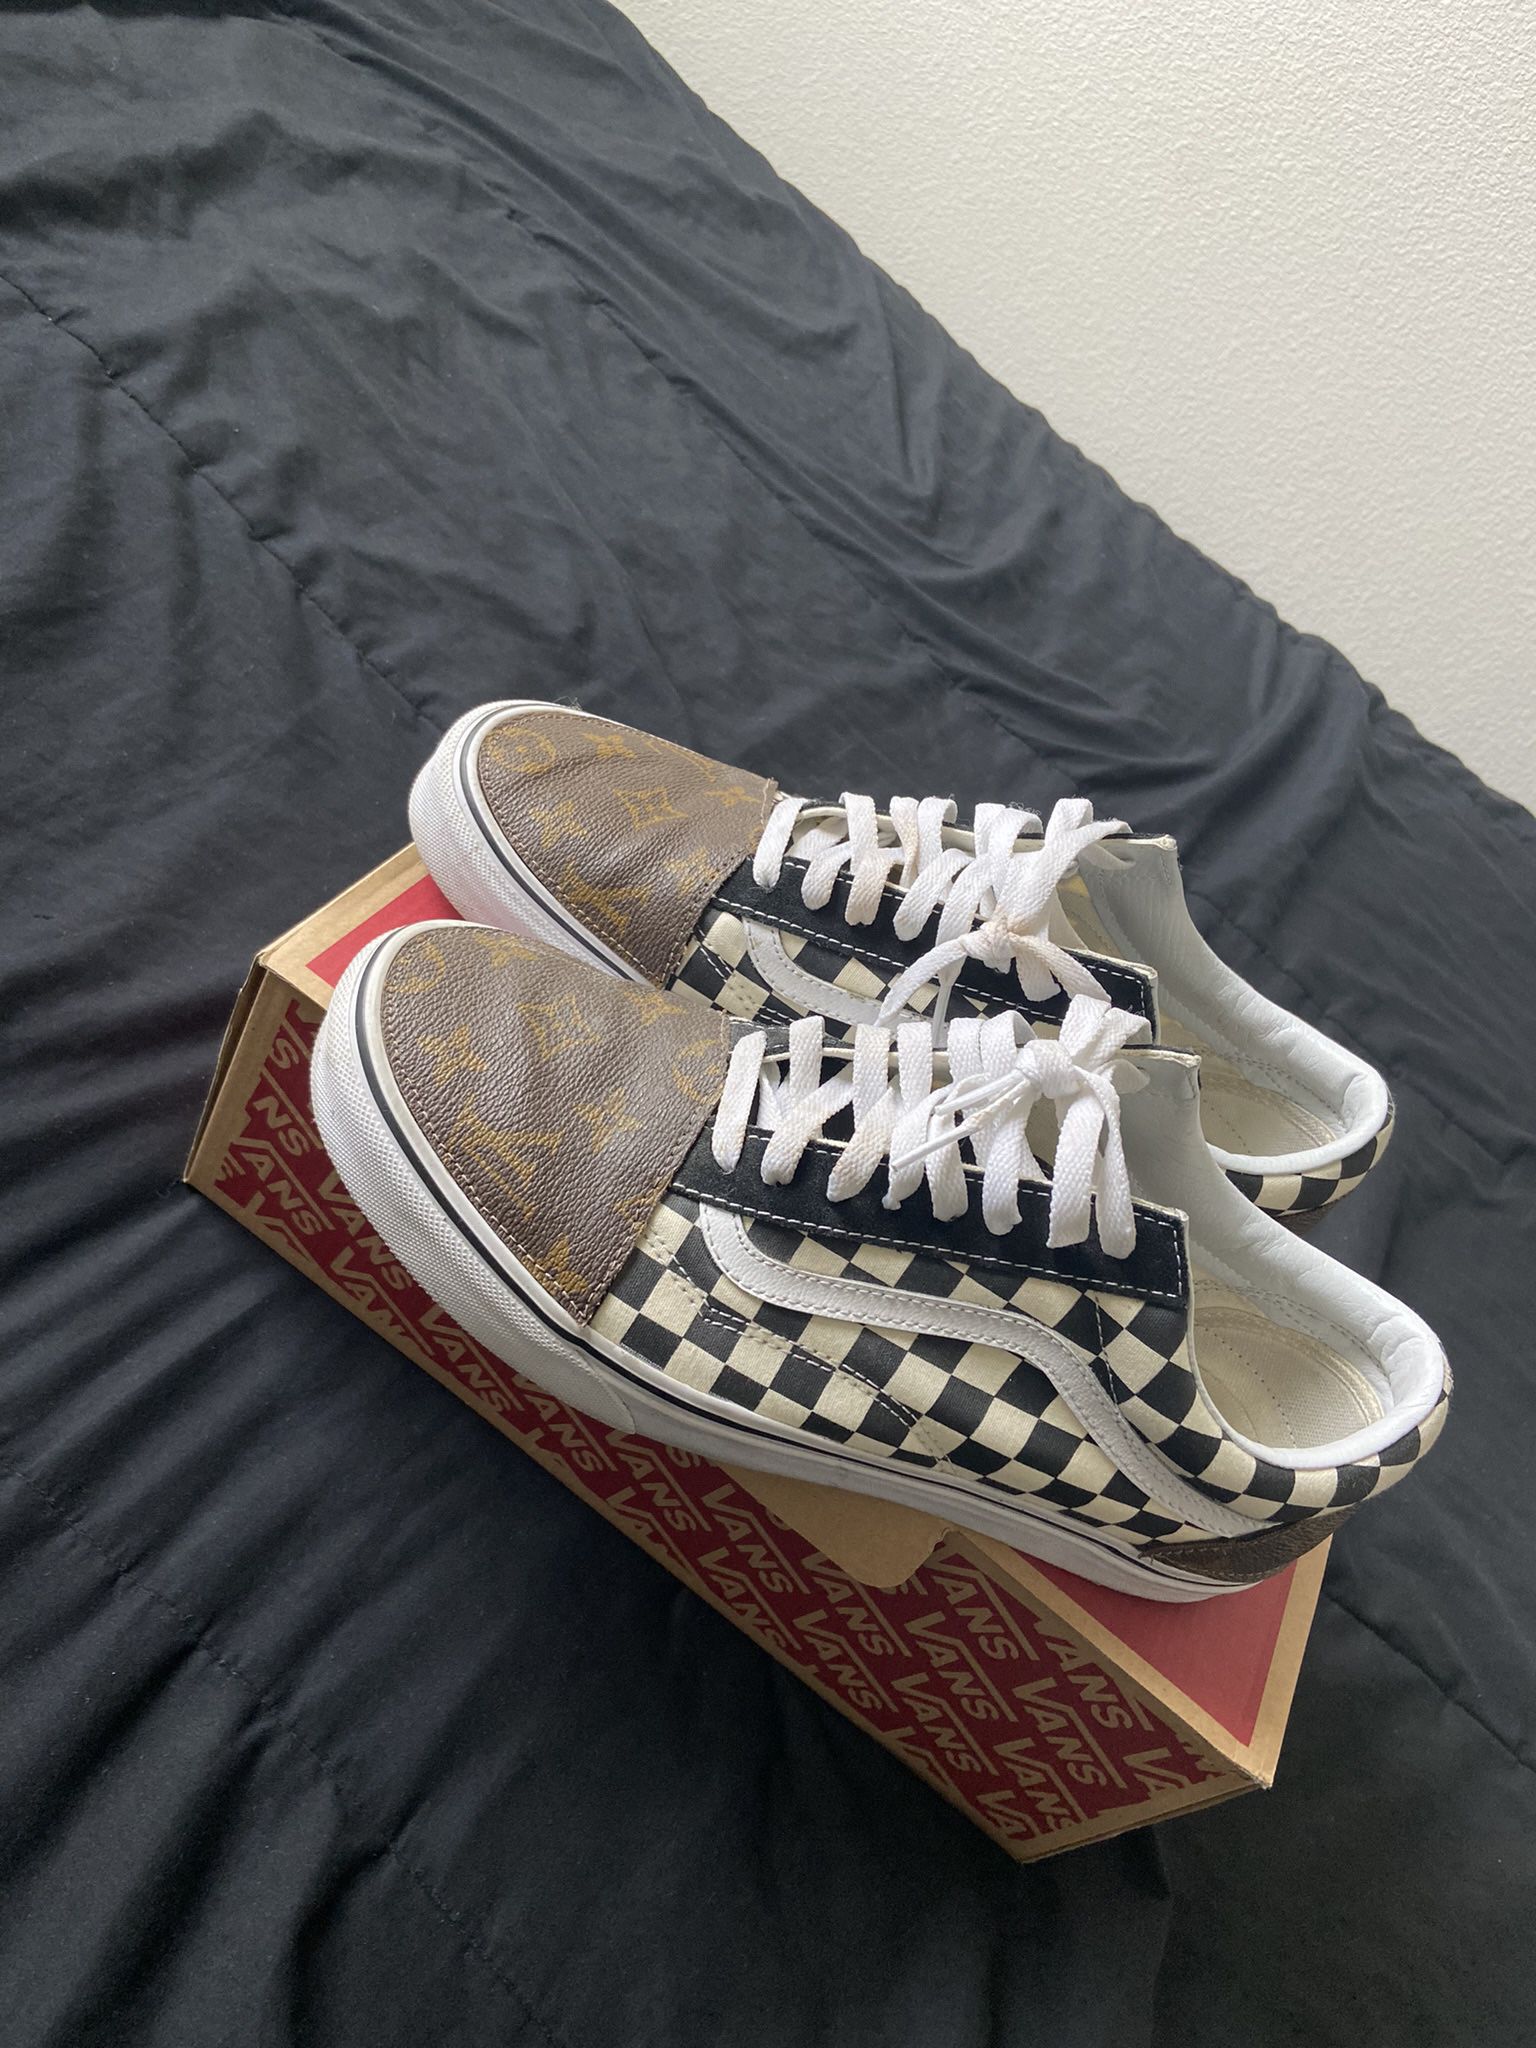 Louis Vuitton Vans for Sale in Rancho Cucamonga, CA - OfferUp